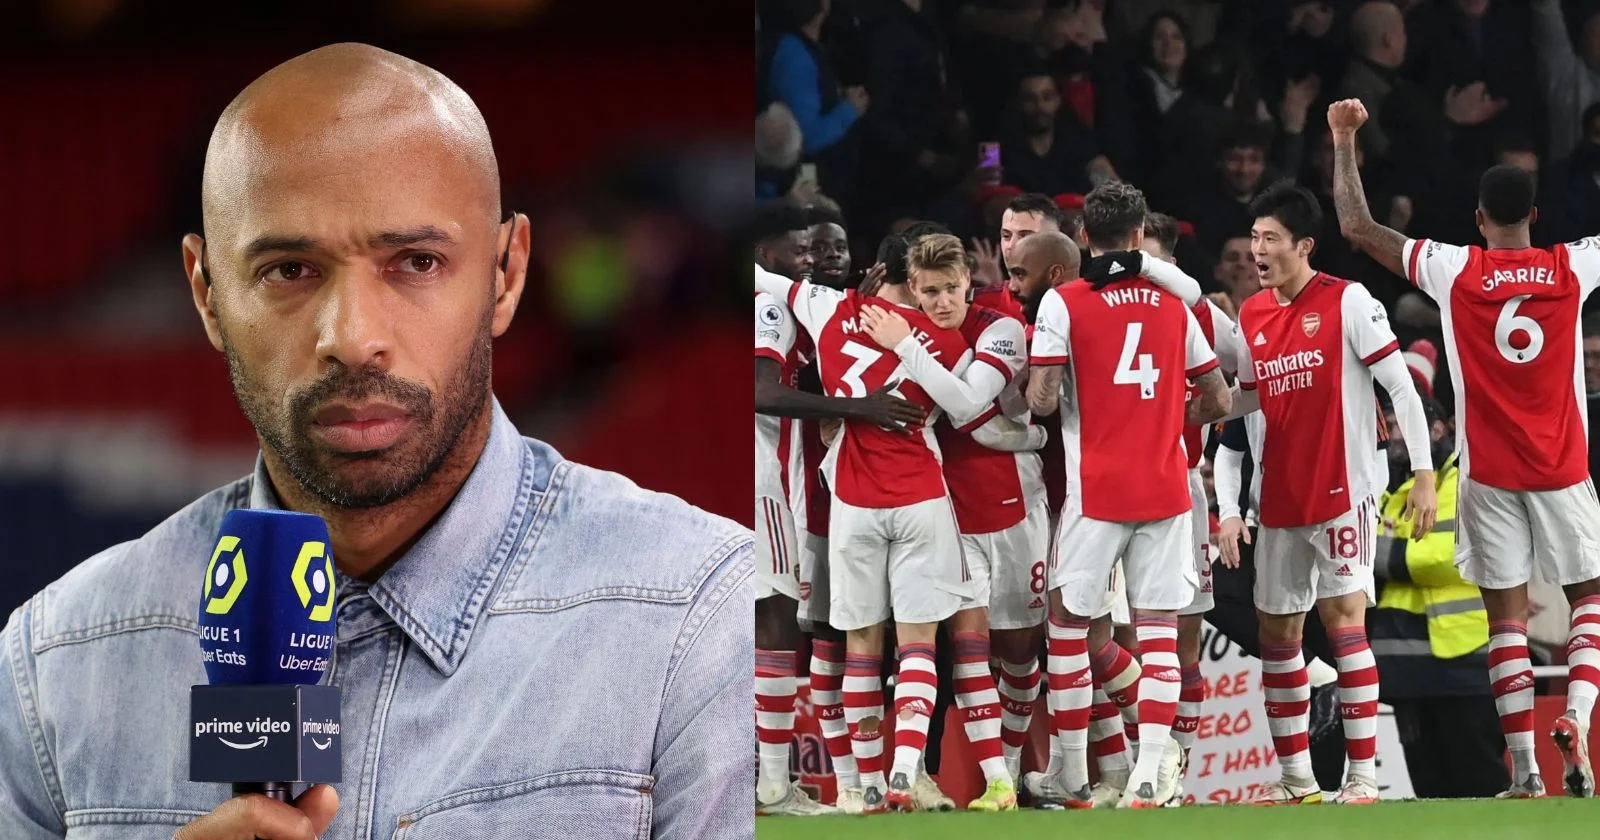 Thierry Henry Wants To Play With This Particular Arsenal Player